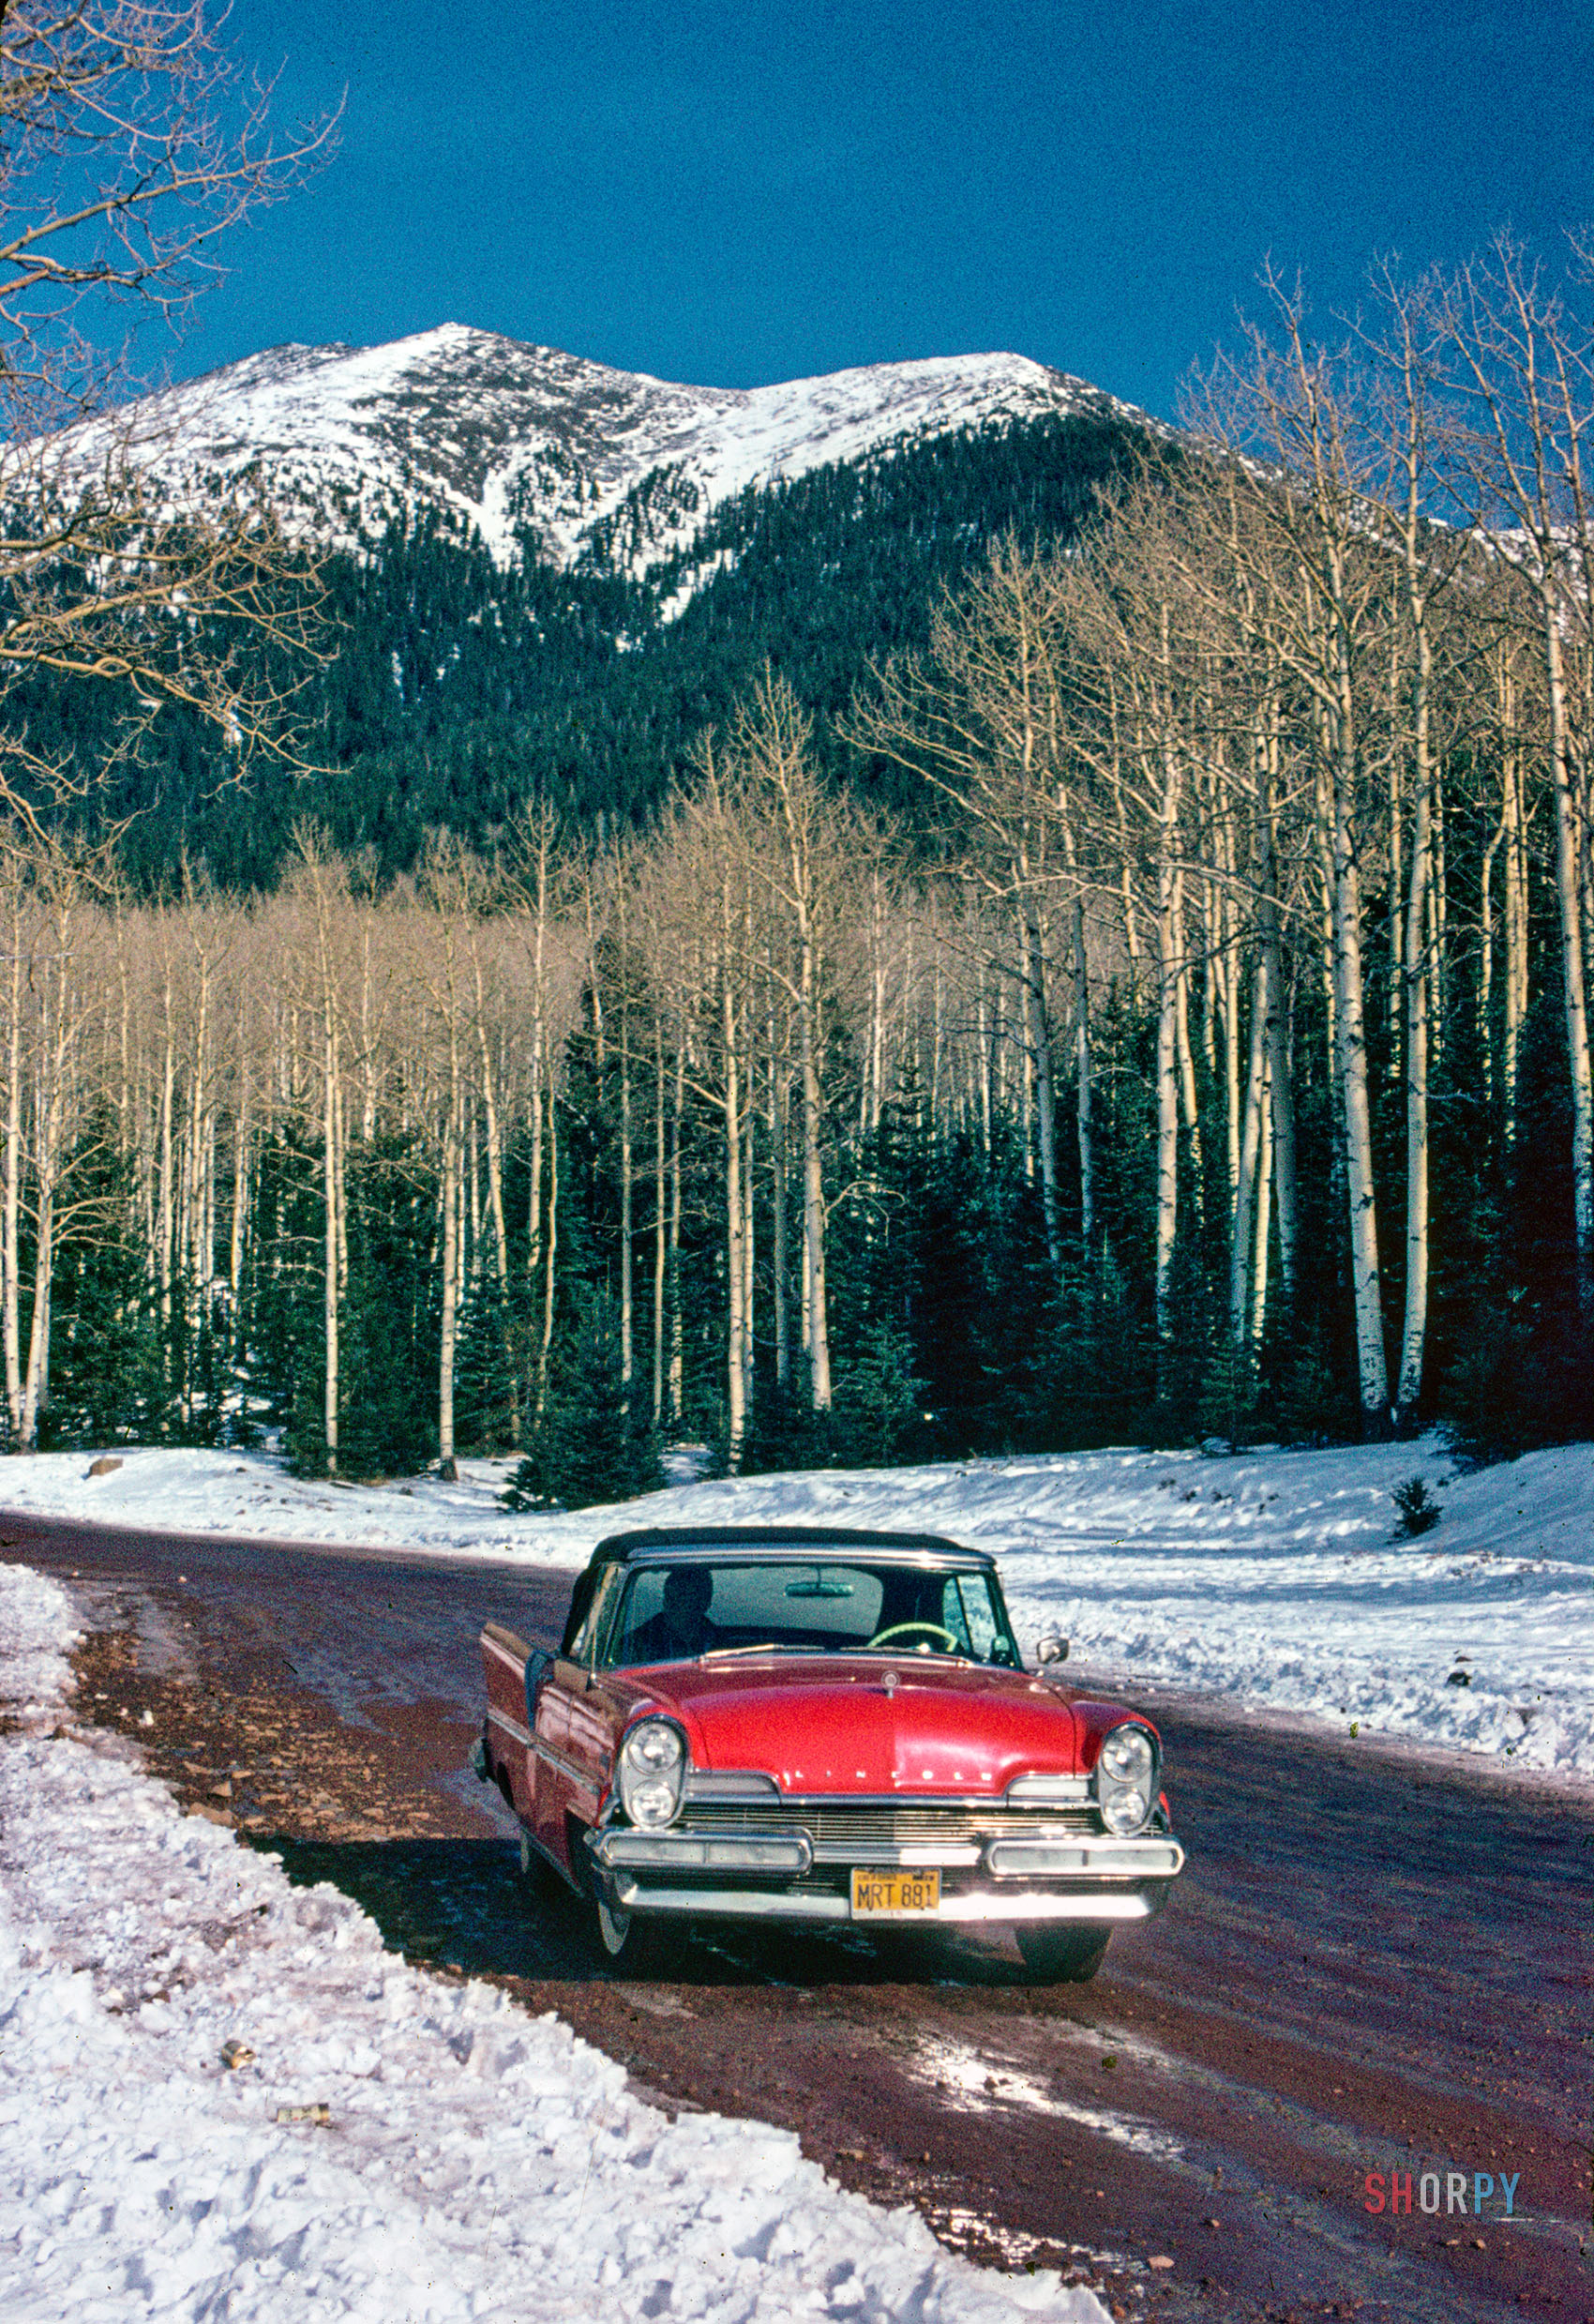 January 1963. "Lincoln convertible on snow road." From somewhere in the Sierras comes this Agfachrome of Don Cox's red 1957 Lincoln Premiere against a backdrop of snow white and sky blue. Happy Fourth of July from Shorpy! View full size.